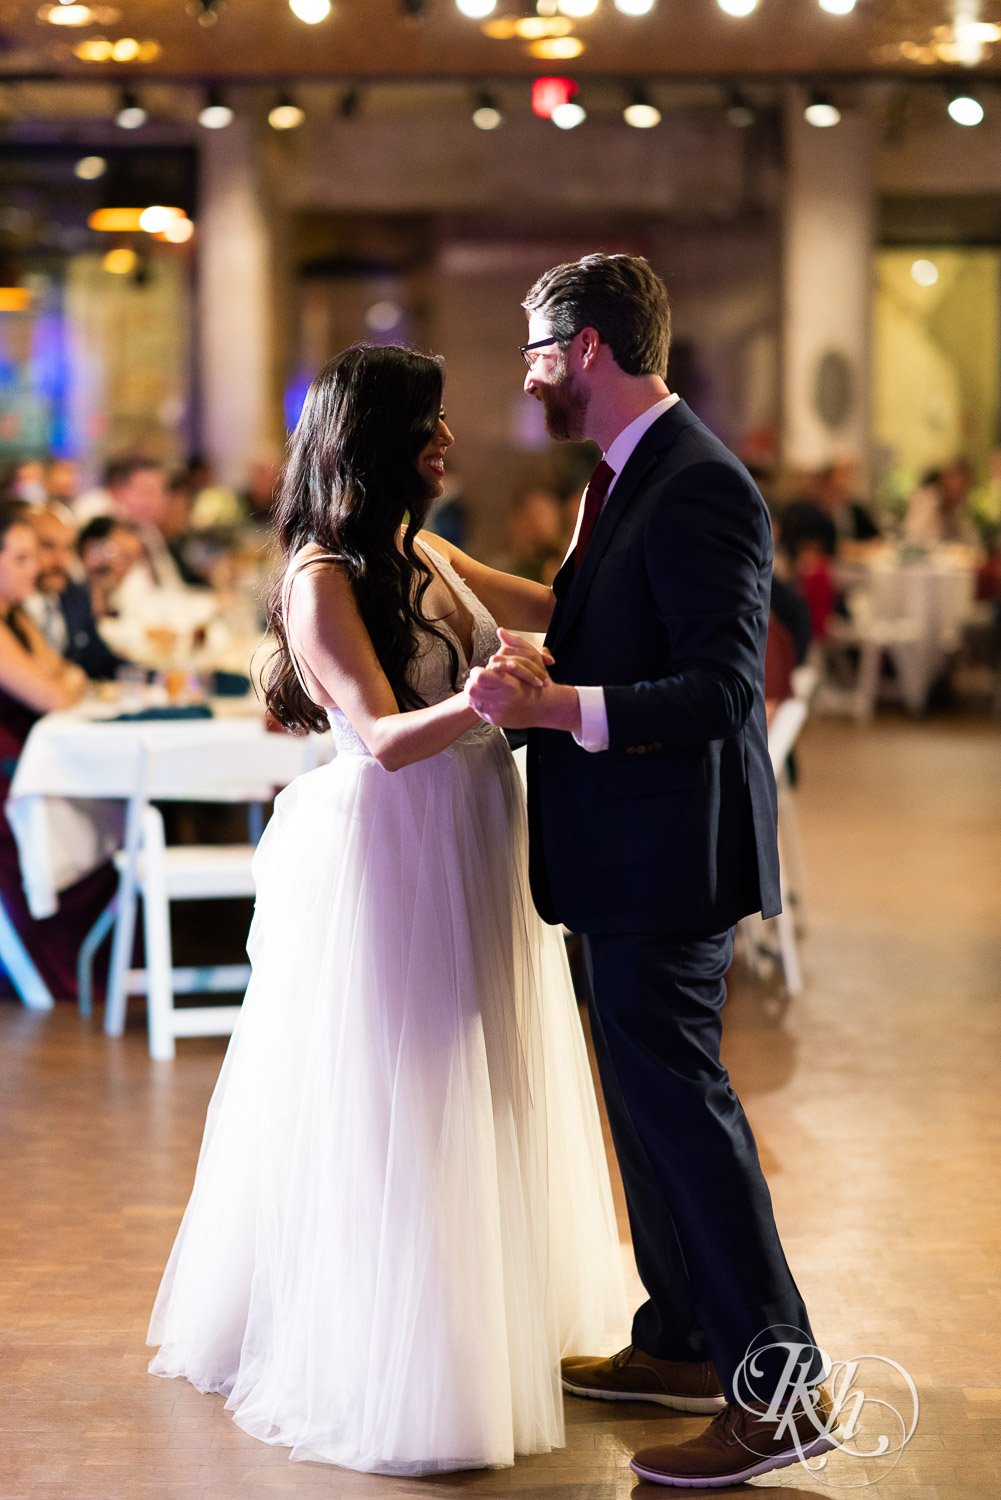 Bride and groom share first dance at wedding reception in Mill City Museum in Minneapolis, Minnesota.